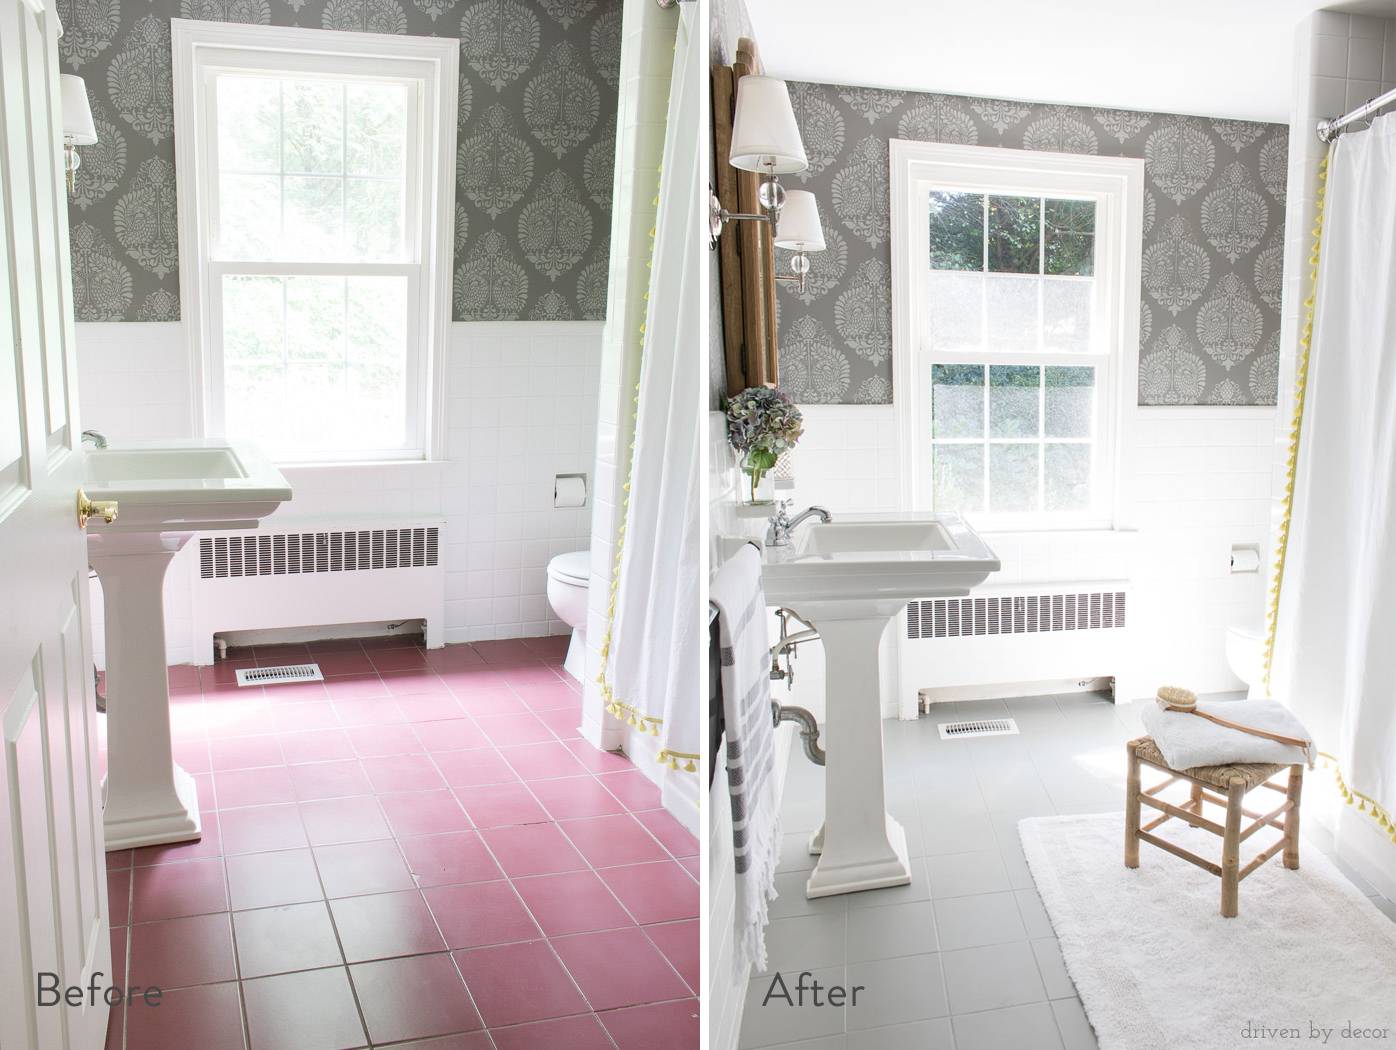 Before and after of painted floor tiles